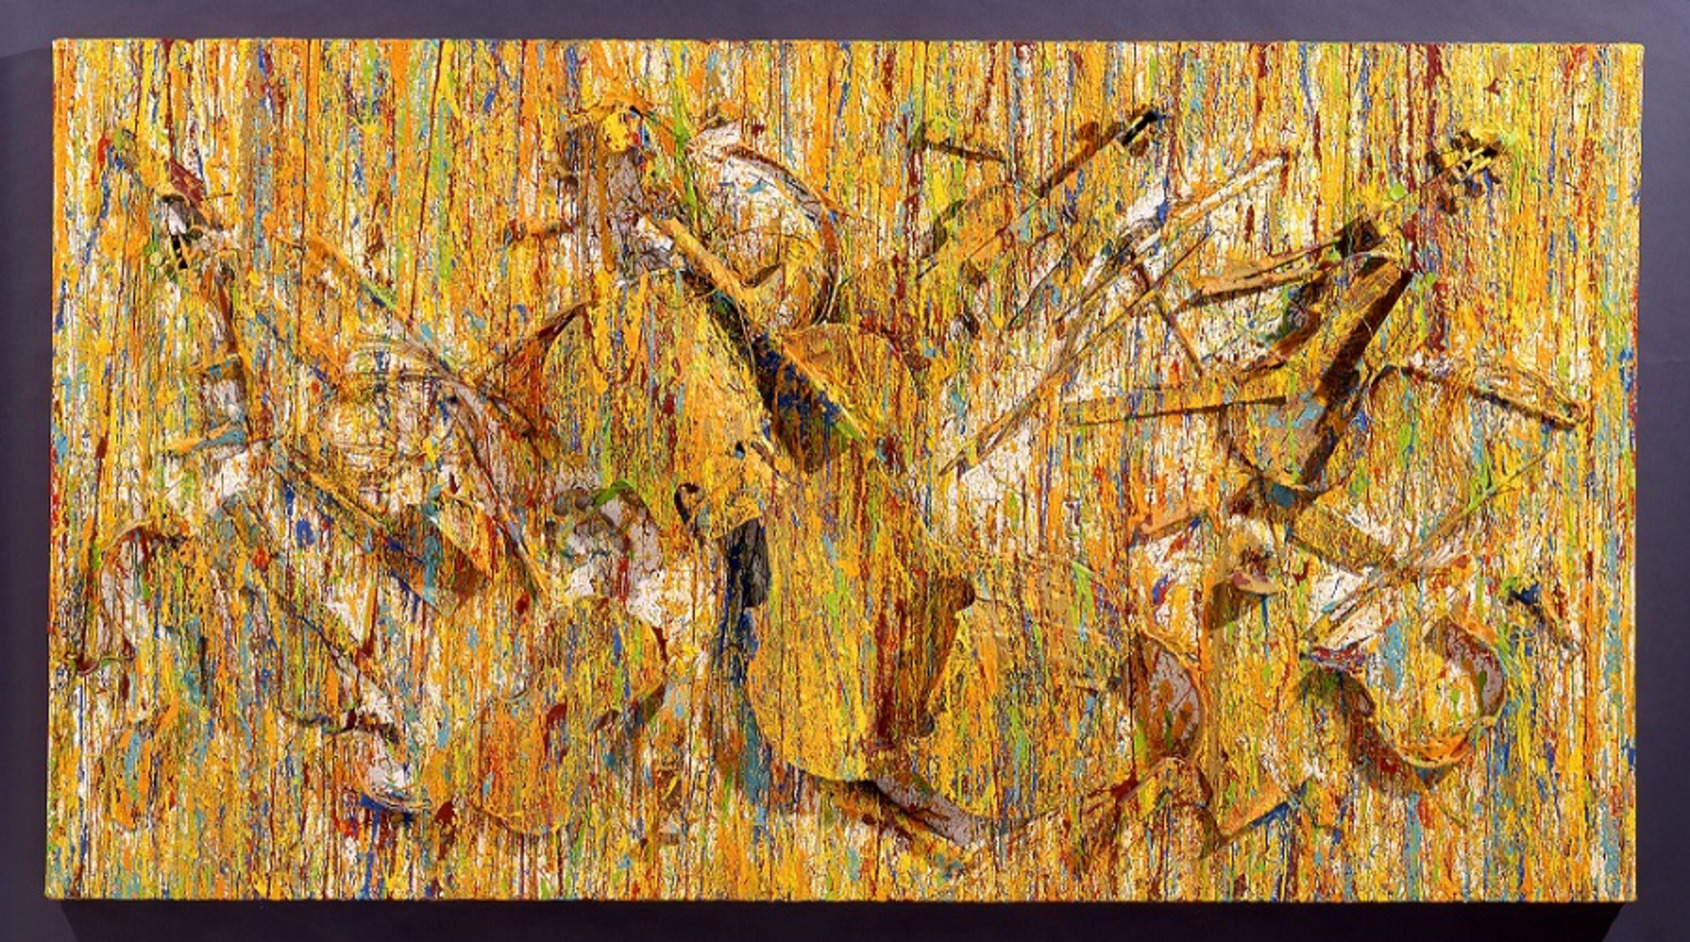 Quatuor d’Automne, Arman, 1991, 124 x 230 x 15 cm. Broken violins and cello with bow and acrylic paint on canvas. Colors: yellow, orange, blue, green, ochre. Courtesy of The Arman Marital Trust. 